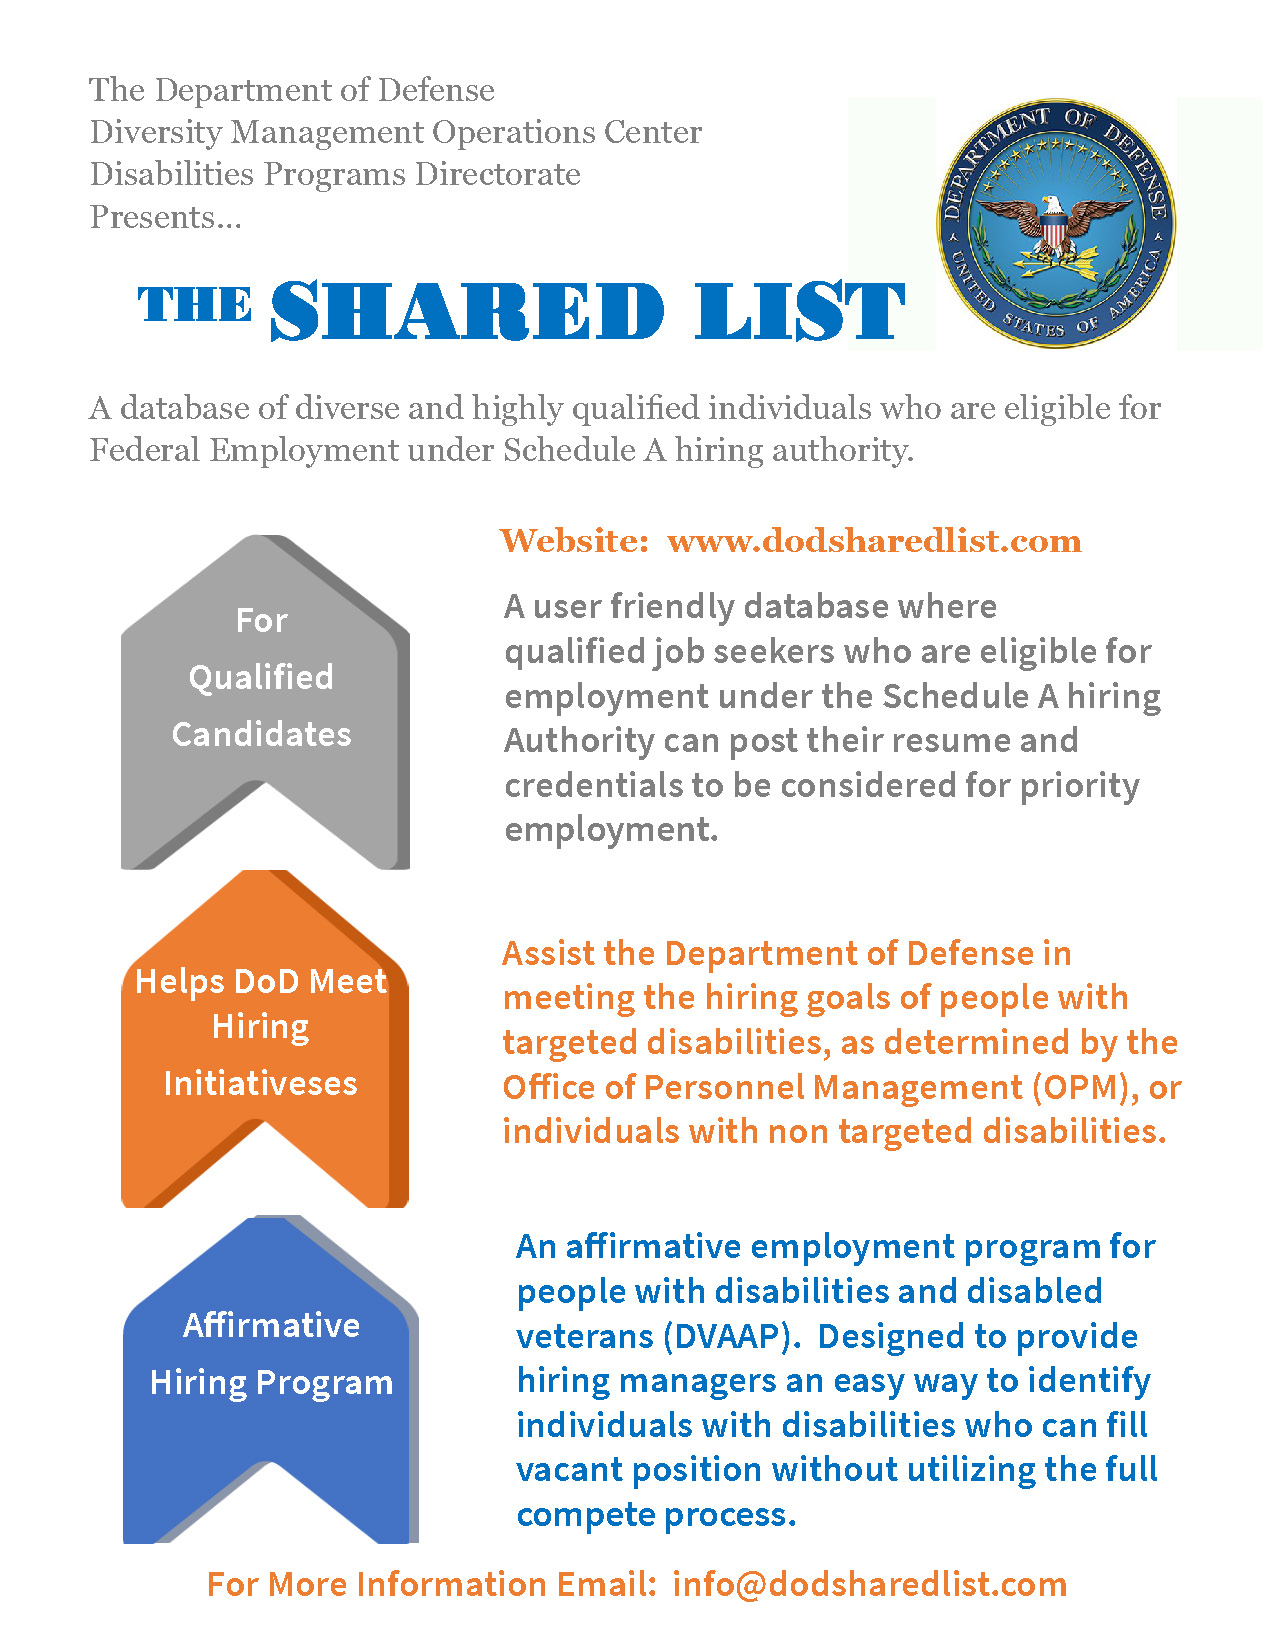 The Shared List is a database of diverse and highly qualified individuals who are eligible for Federal Employment under Schedule A hiring Authority